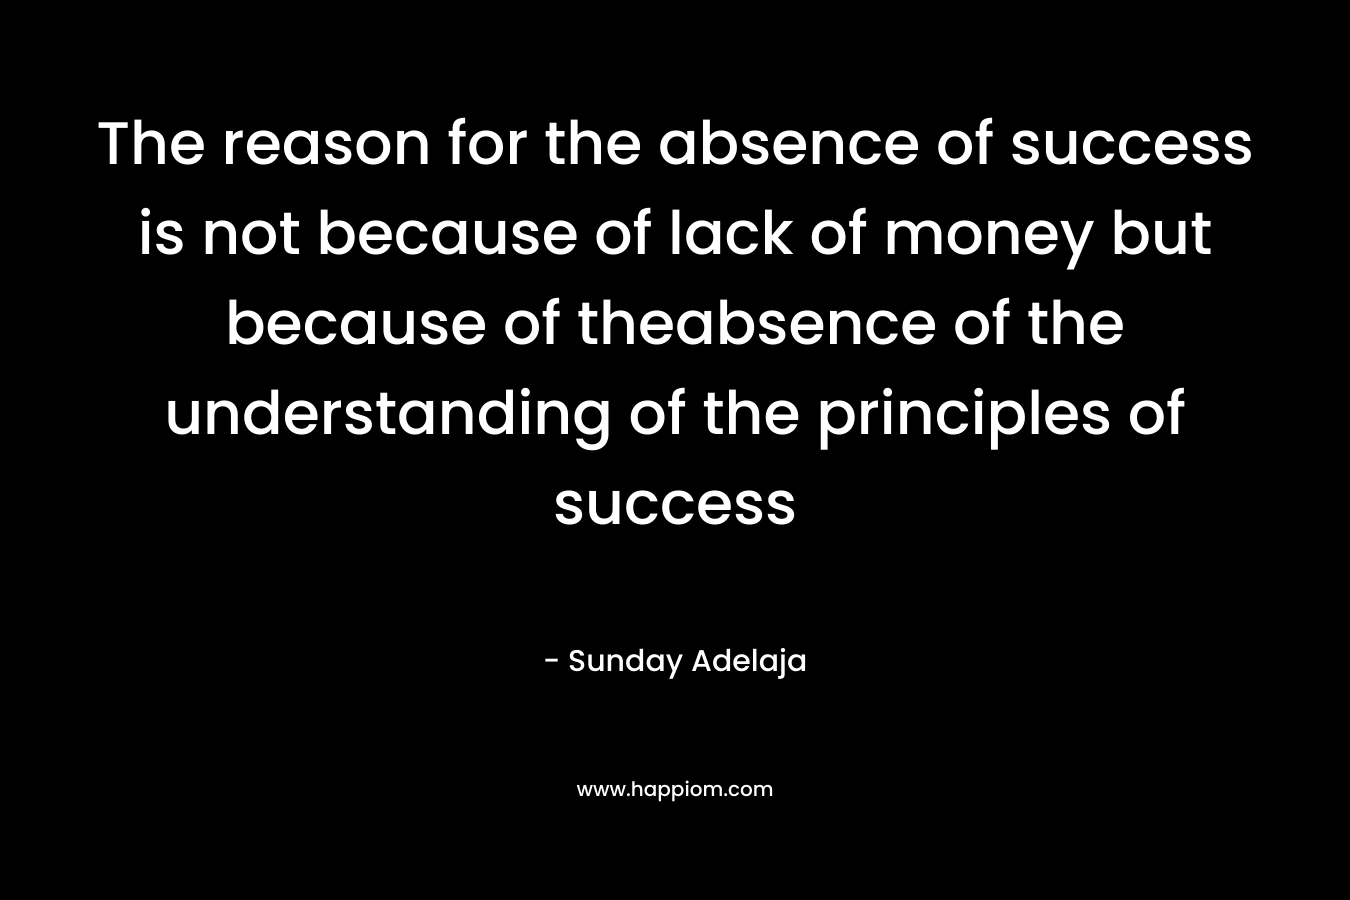 The reason for the absence of success is not because of lack of money but because of theabsence of the understanding of the principles of success